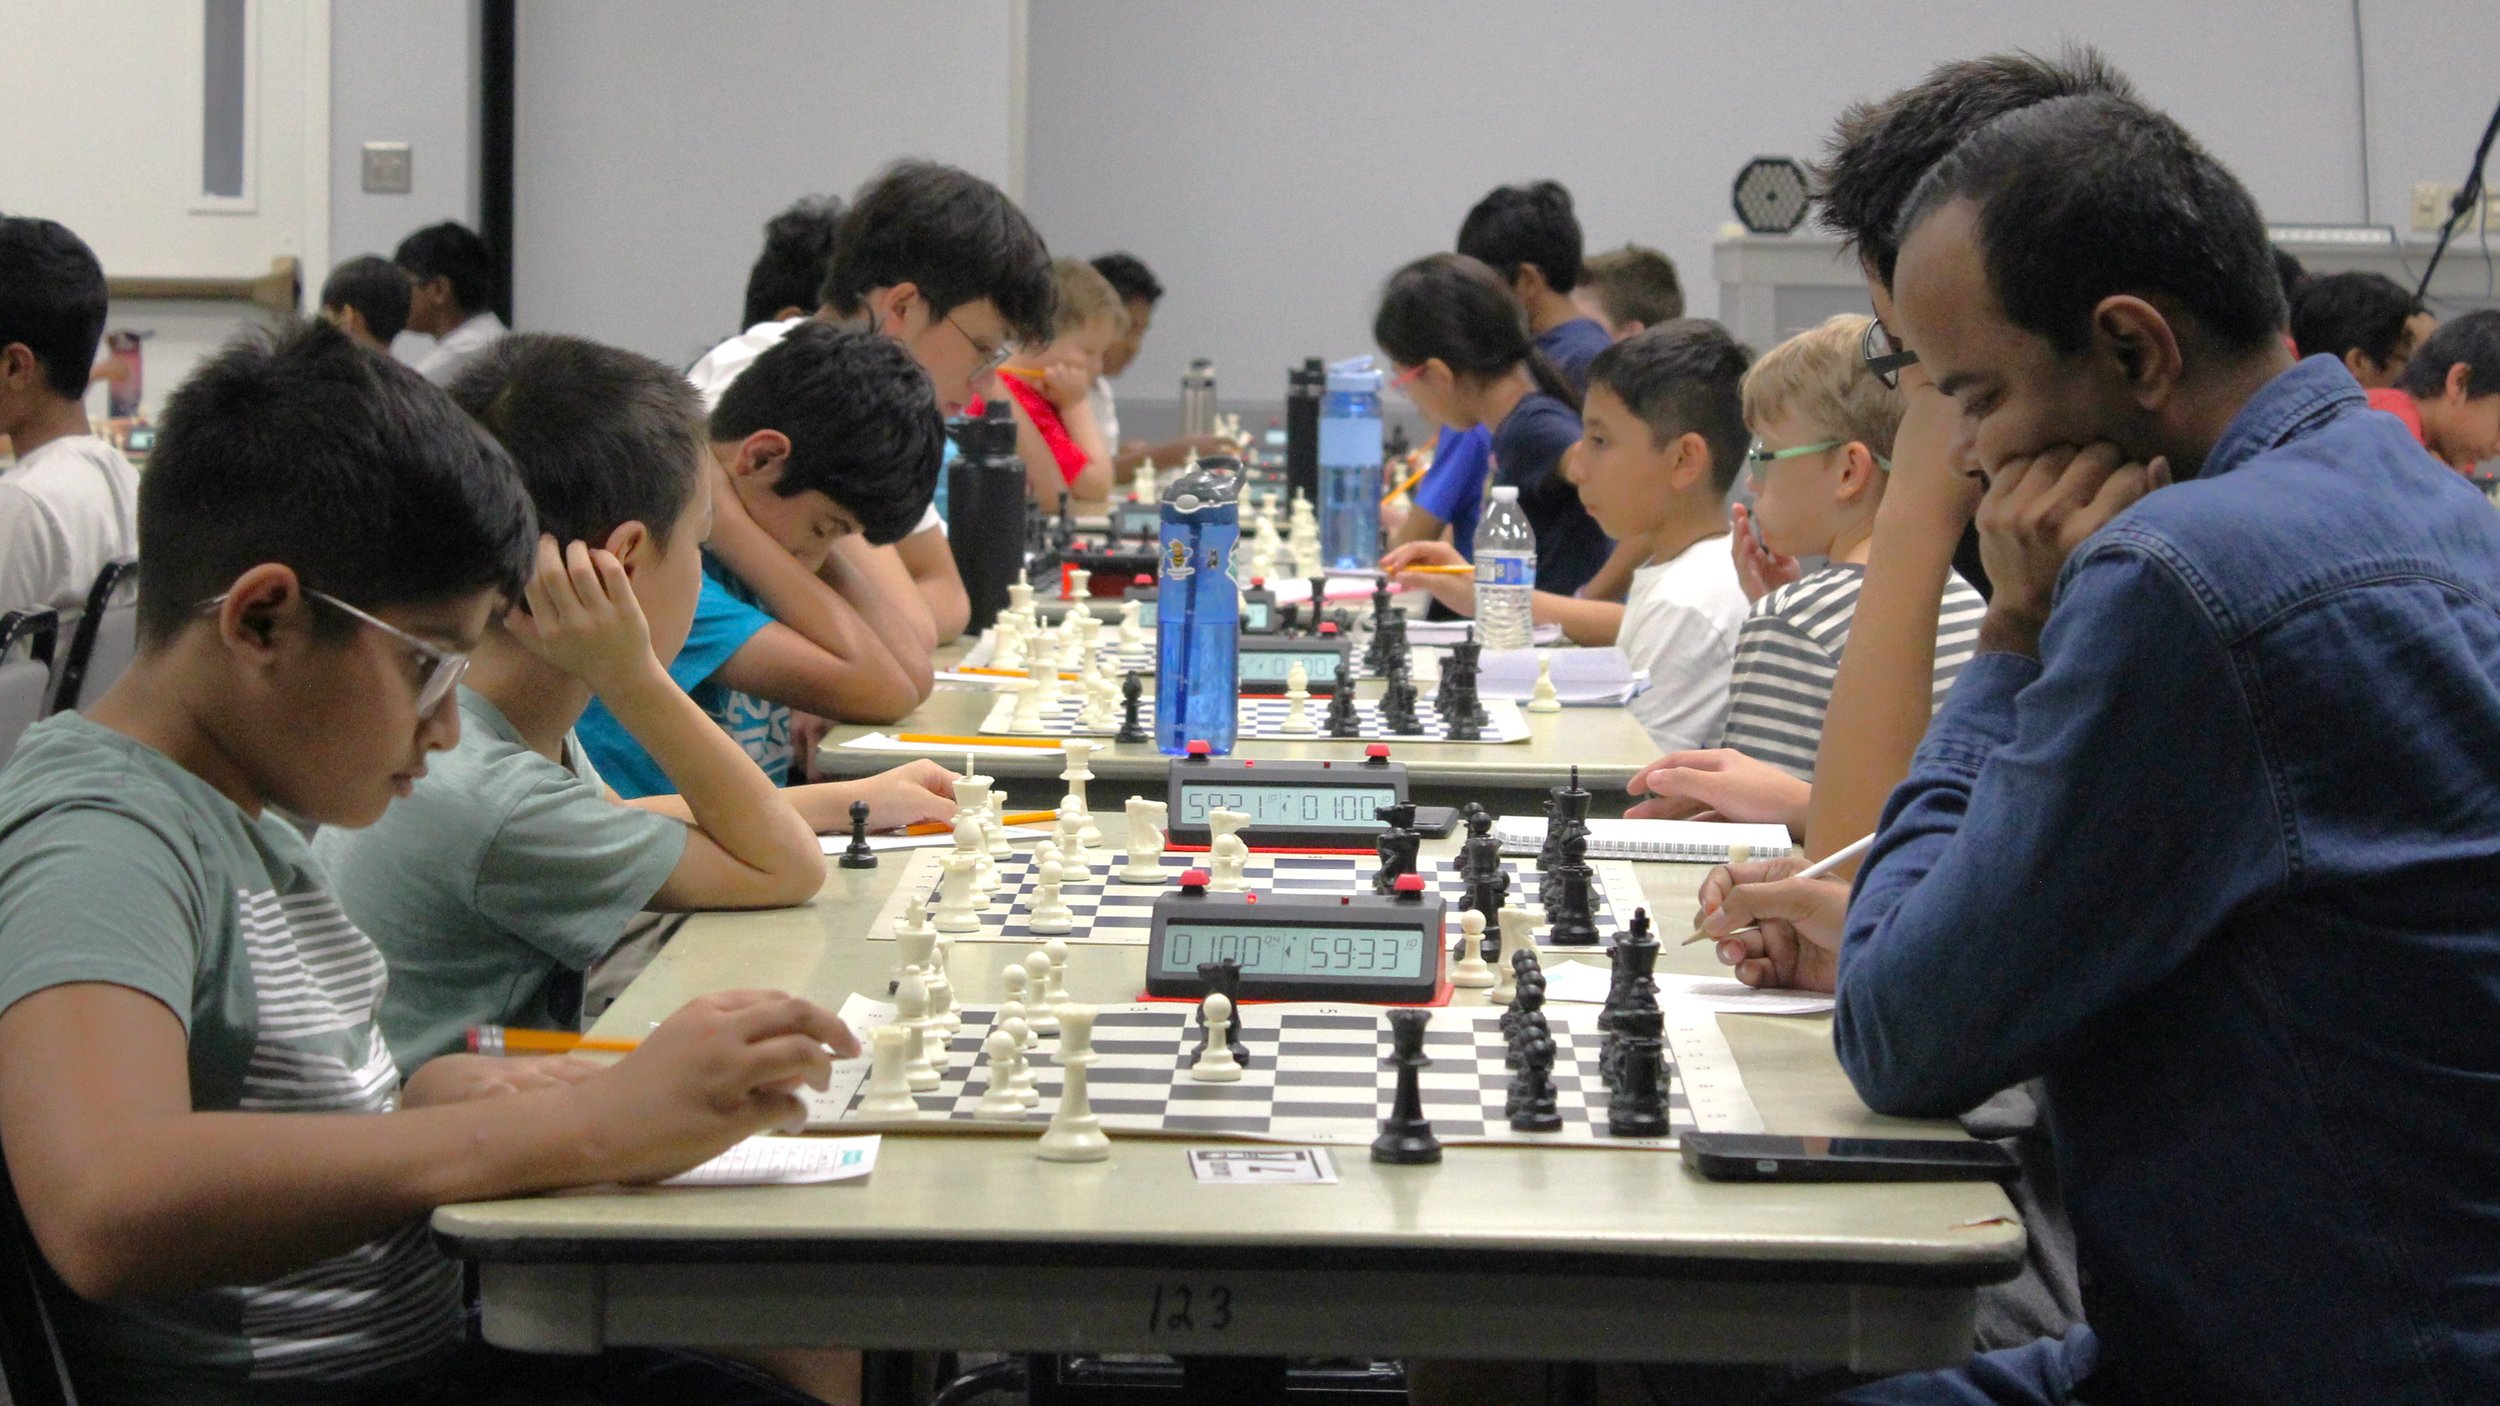 Chess Events